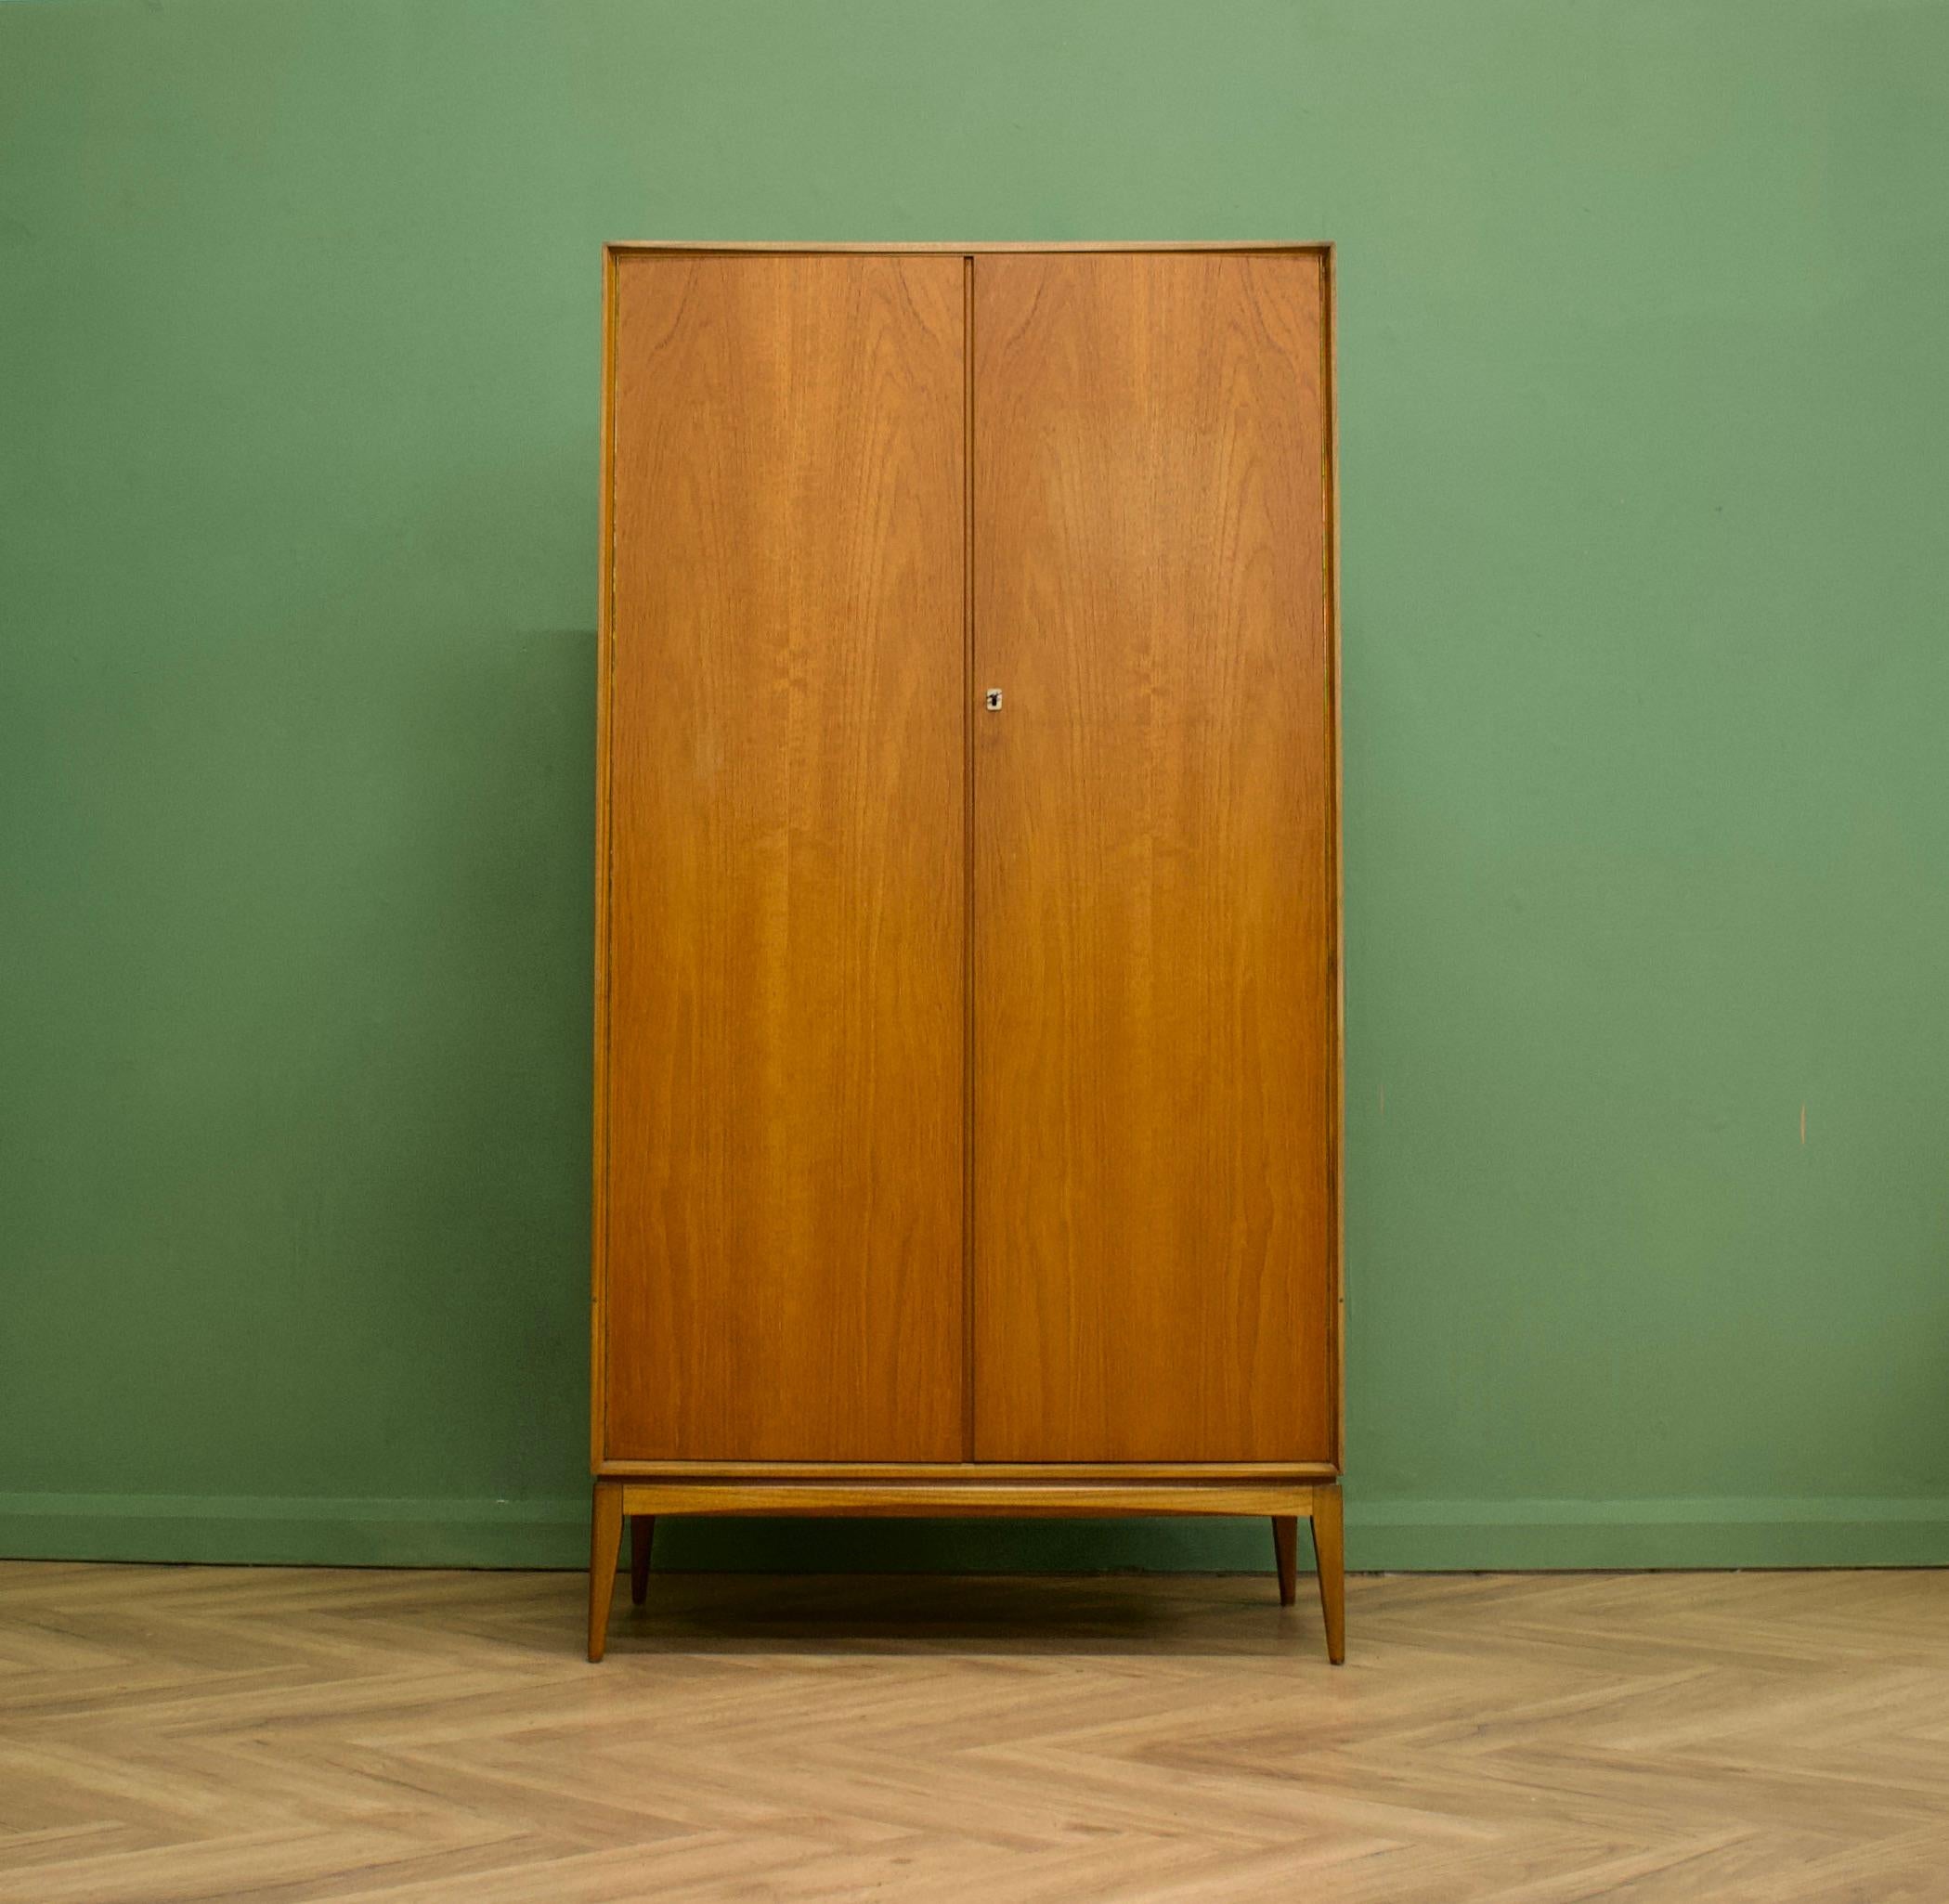 A freestanding double door teak wardrobe from McIntosh - in the Danish modern style
Made during the 1960s

Fitted out with a clothes rail and fixed shelving for ample storage in such a compact piece
The style of this wardrobe is minimalist -